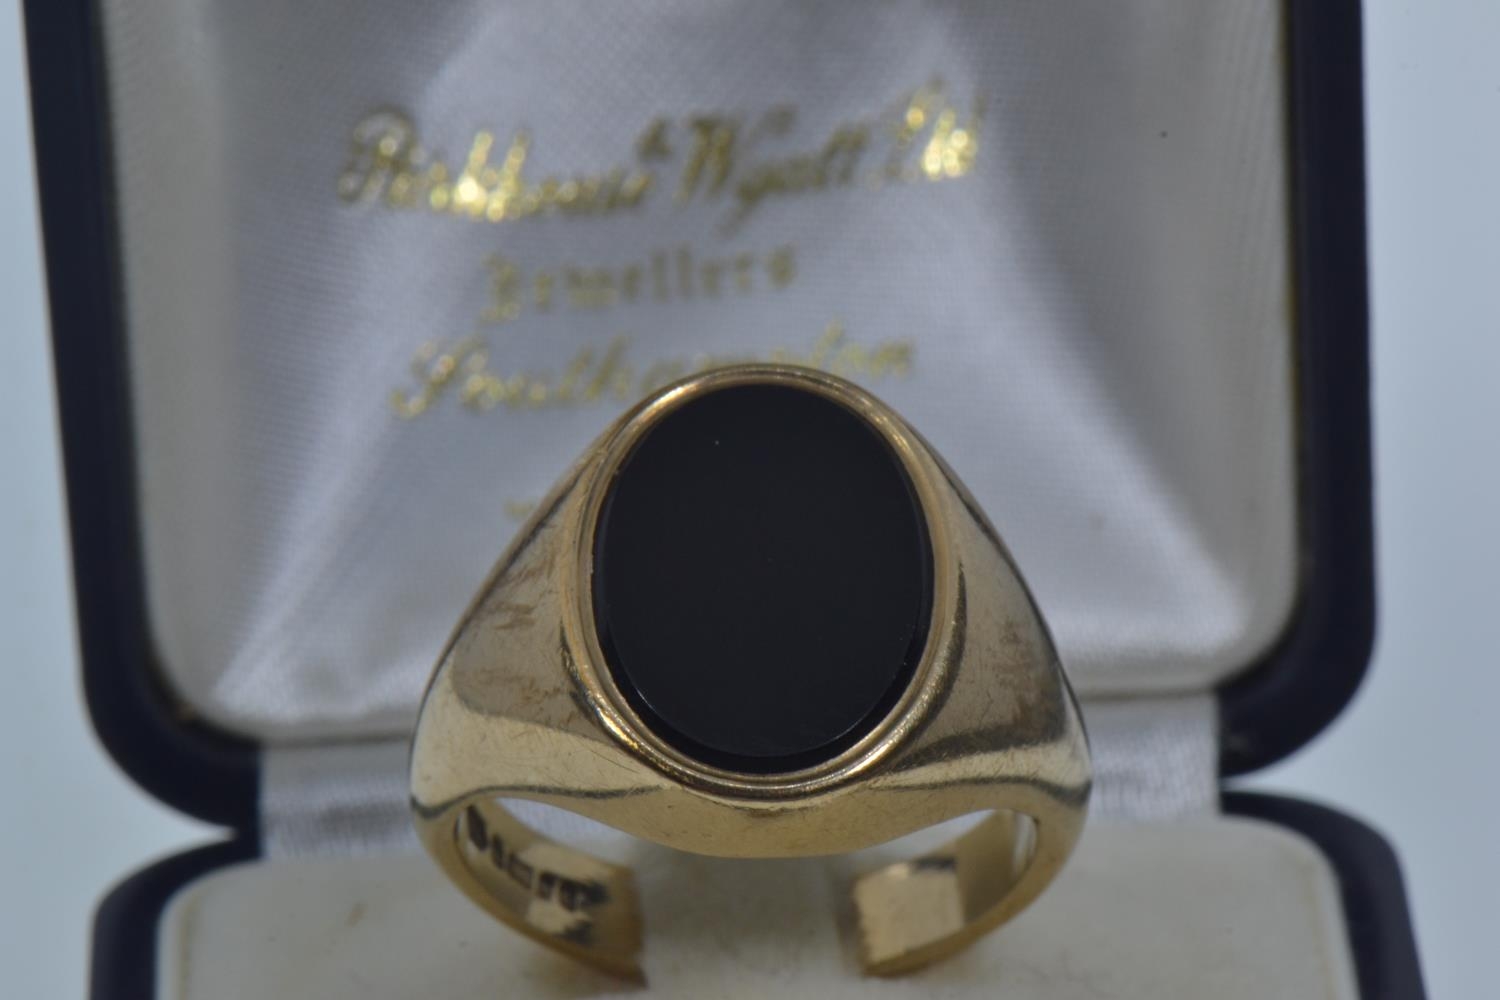 9ct gold & black onyx signet ring, hallmarked Birmingham 1977, size V, gross weight 10.95 grams  - Image 2 of 5